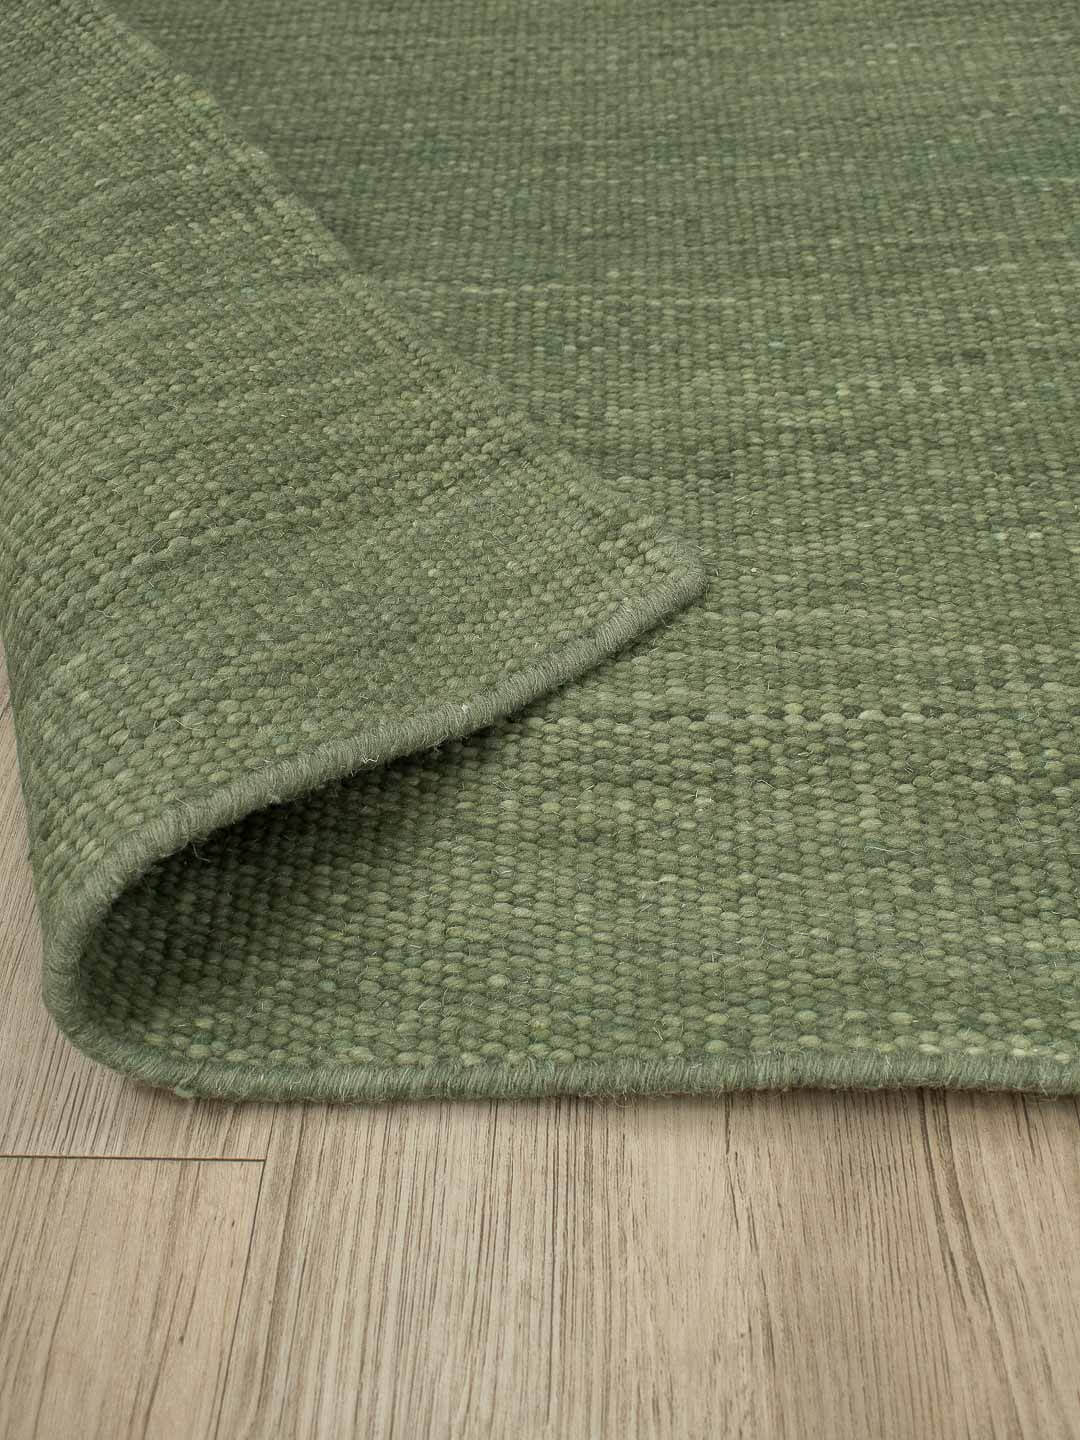 Yarra Rug Moss is 20% off from the Rug Collection Stockist Make Your House A Home, Furniture Store Bendigo. Free Australia Wide Delivery